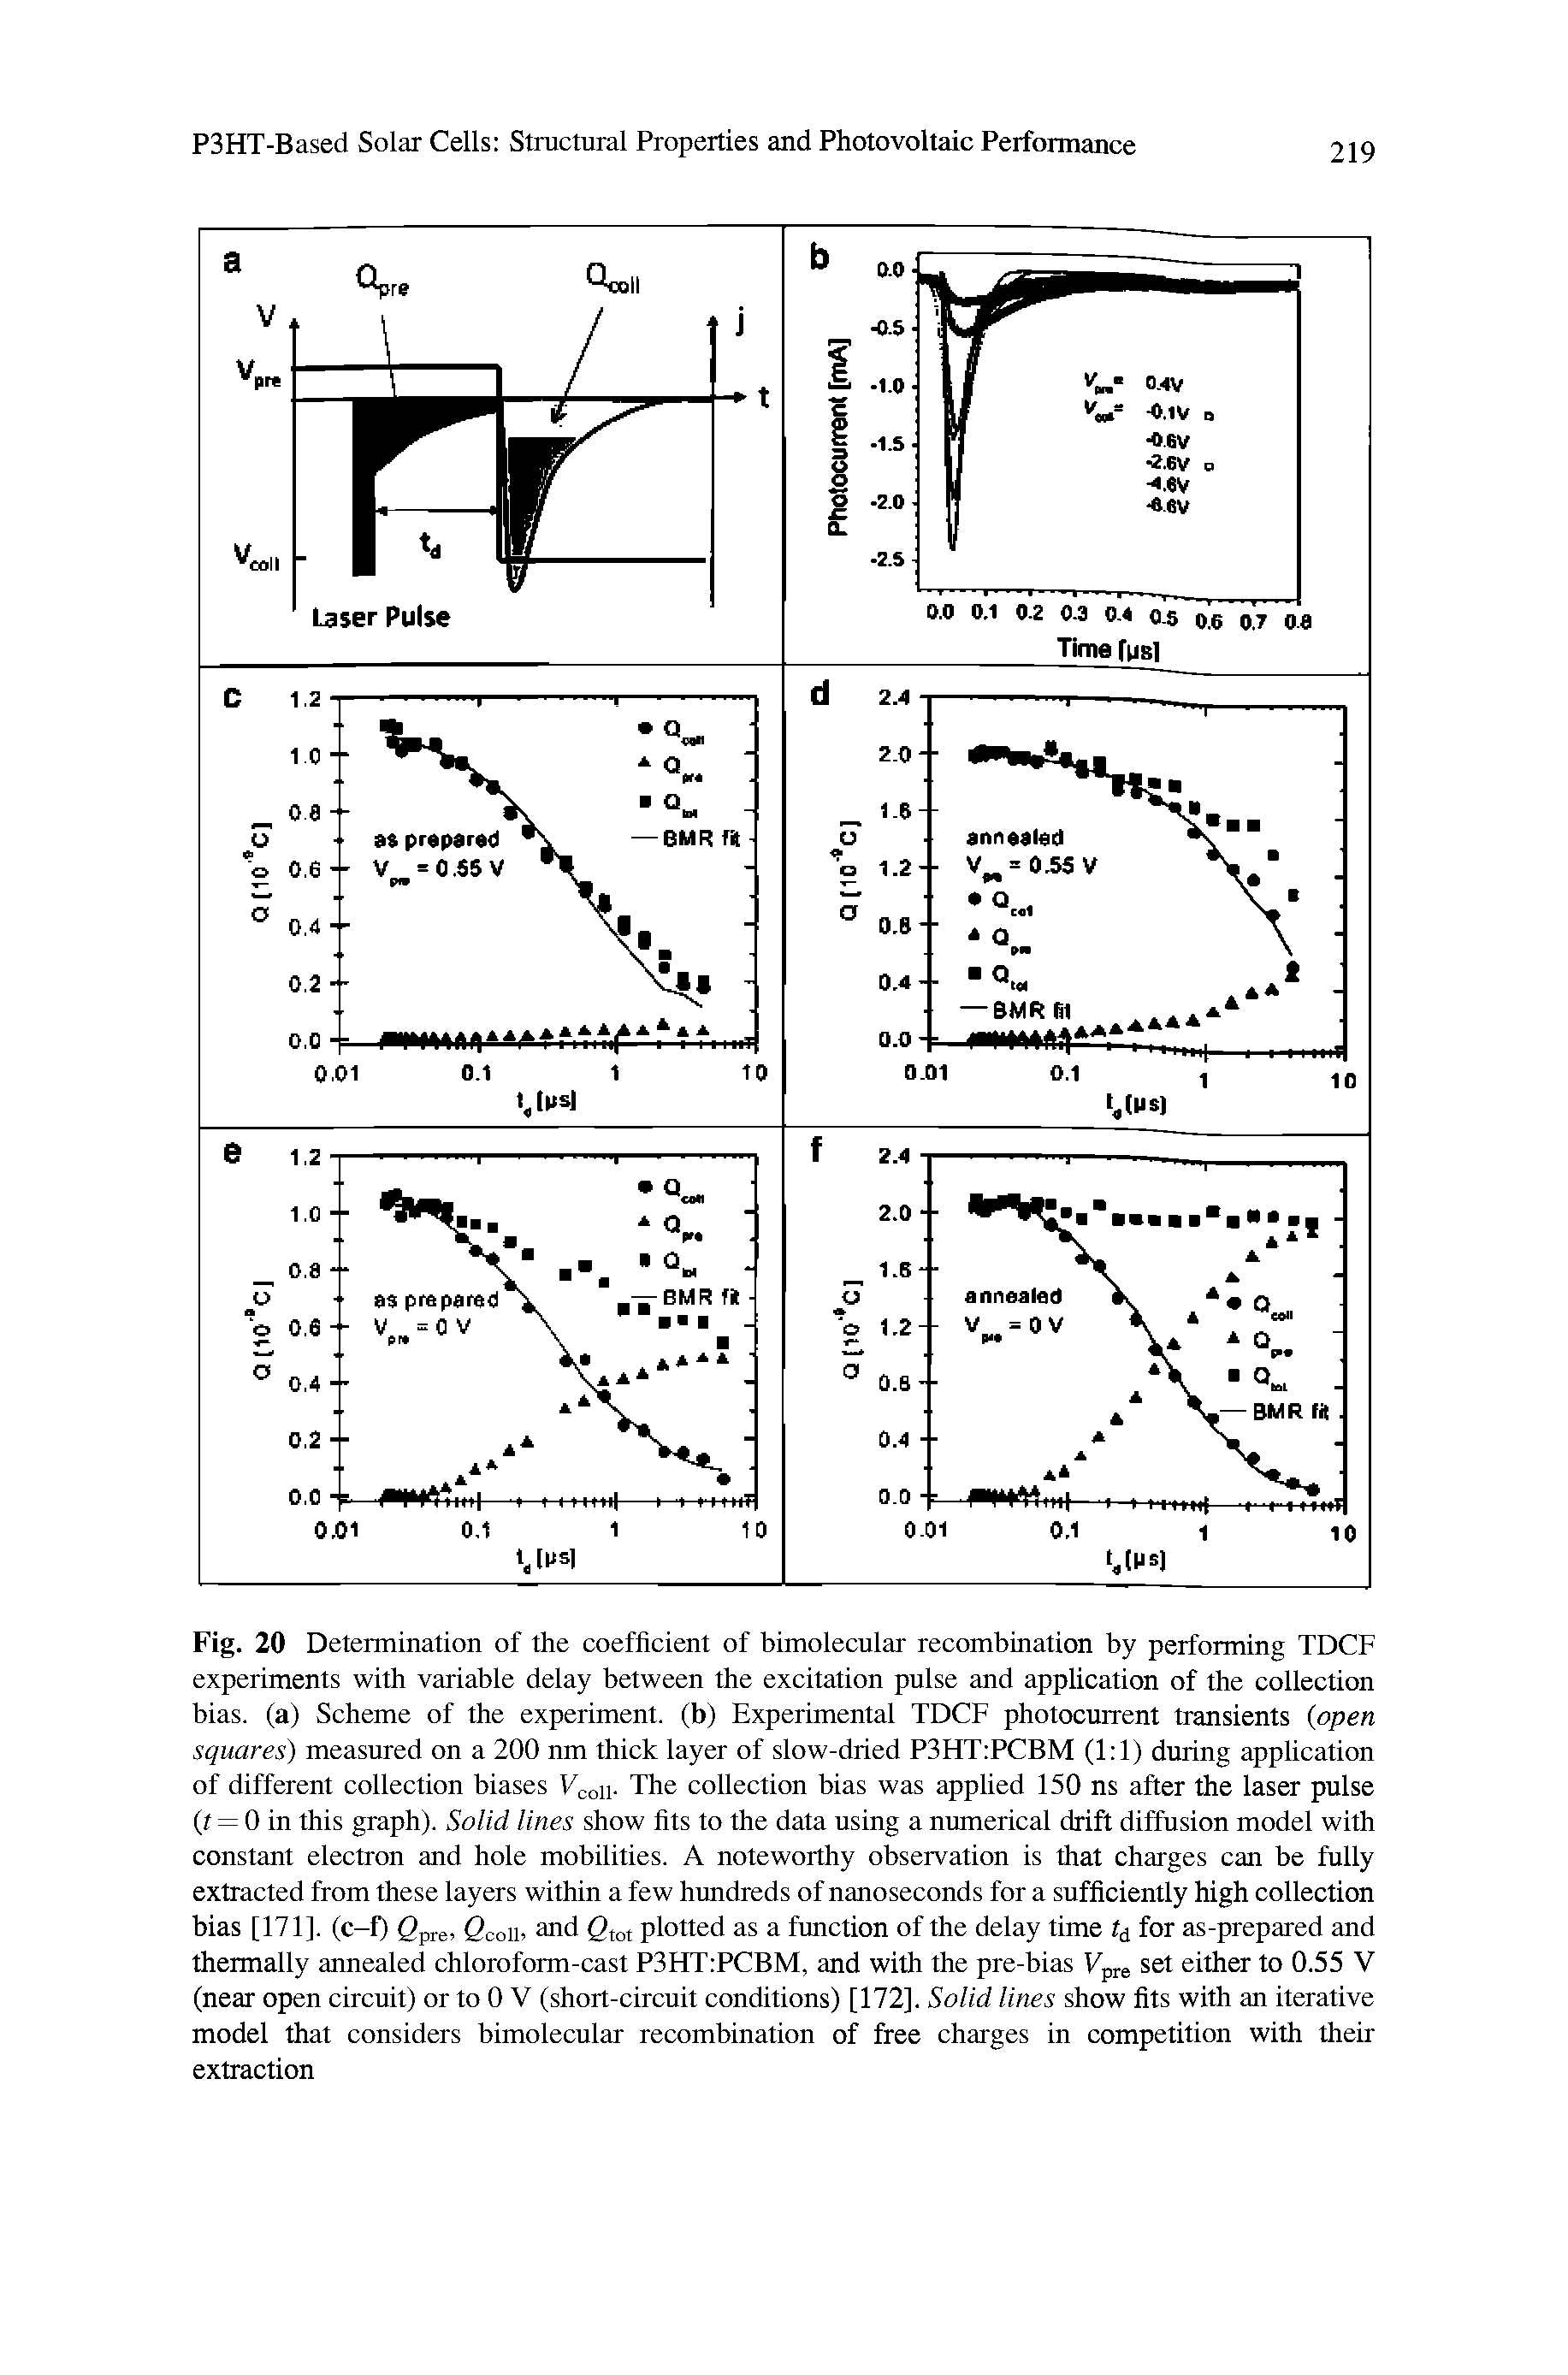 Fig. 20 Determination of the coefficient of bimolecular recombination by performing TDCF experiments with variable delay between the excitation pulse and application of the collection bias, (a) Scheme of the experiment, (b) Experimental TDCF photocurrent transients (open squares) measured on a 200 nm thick layer of slow-dried POFTTiPCBM (1 1) during application of different collection biases Fcoii- The collection bias was applied 150 ns after the laser pulse (t = 0 in this graph). Solid lines show fits to the data using a numerical drift diffusion model with constant electron and hole mobilities. A noteworthy observation is that charges can be fully extracted from these layers within a few hundreds of nanoseconds for a sufficiently high collection bias [171]. (c-f) Q-pre, 2coii> and 2,o, plotted as a function of the delay time for as-prepared and thermally annealed chloroform-cast P3F1T PCBM, and with the pre-bias Fpre set either to 0.55 V (near open circuit) or to 0 V (short-circuit conditions) [172]. Solid lines show fits with an iterative model that considers bimolecular recombination of free charges in competition with their extraction...